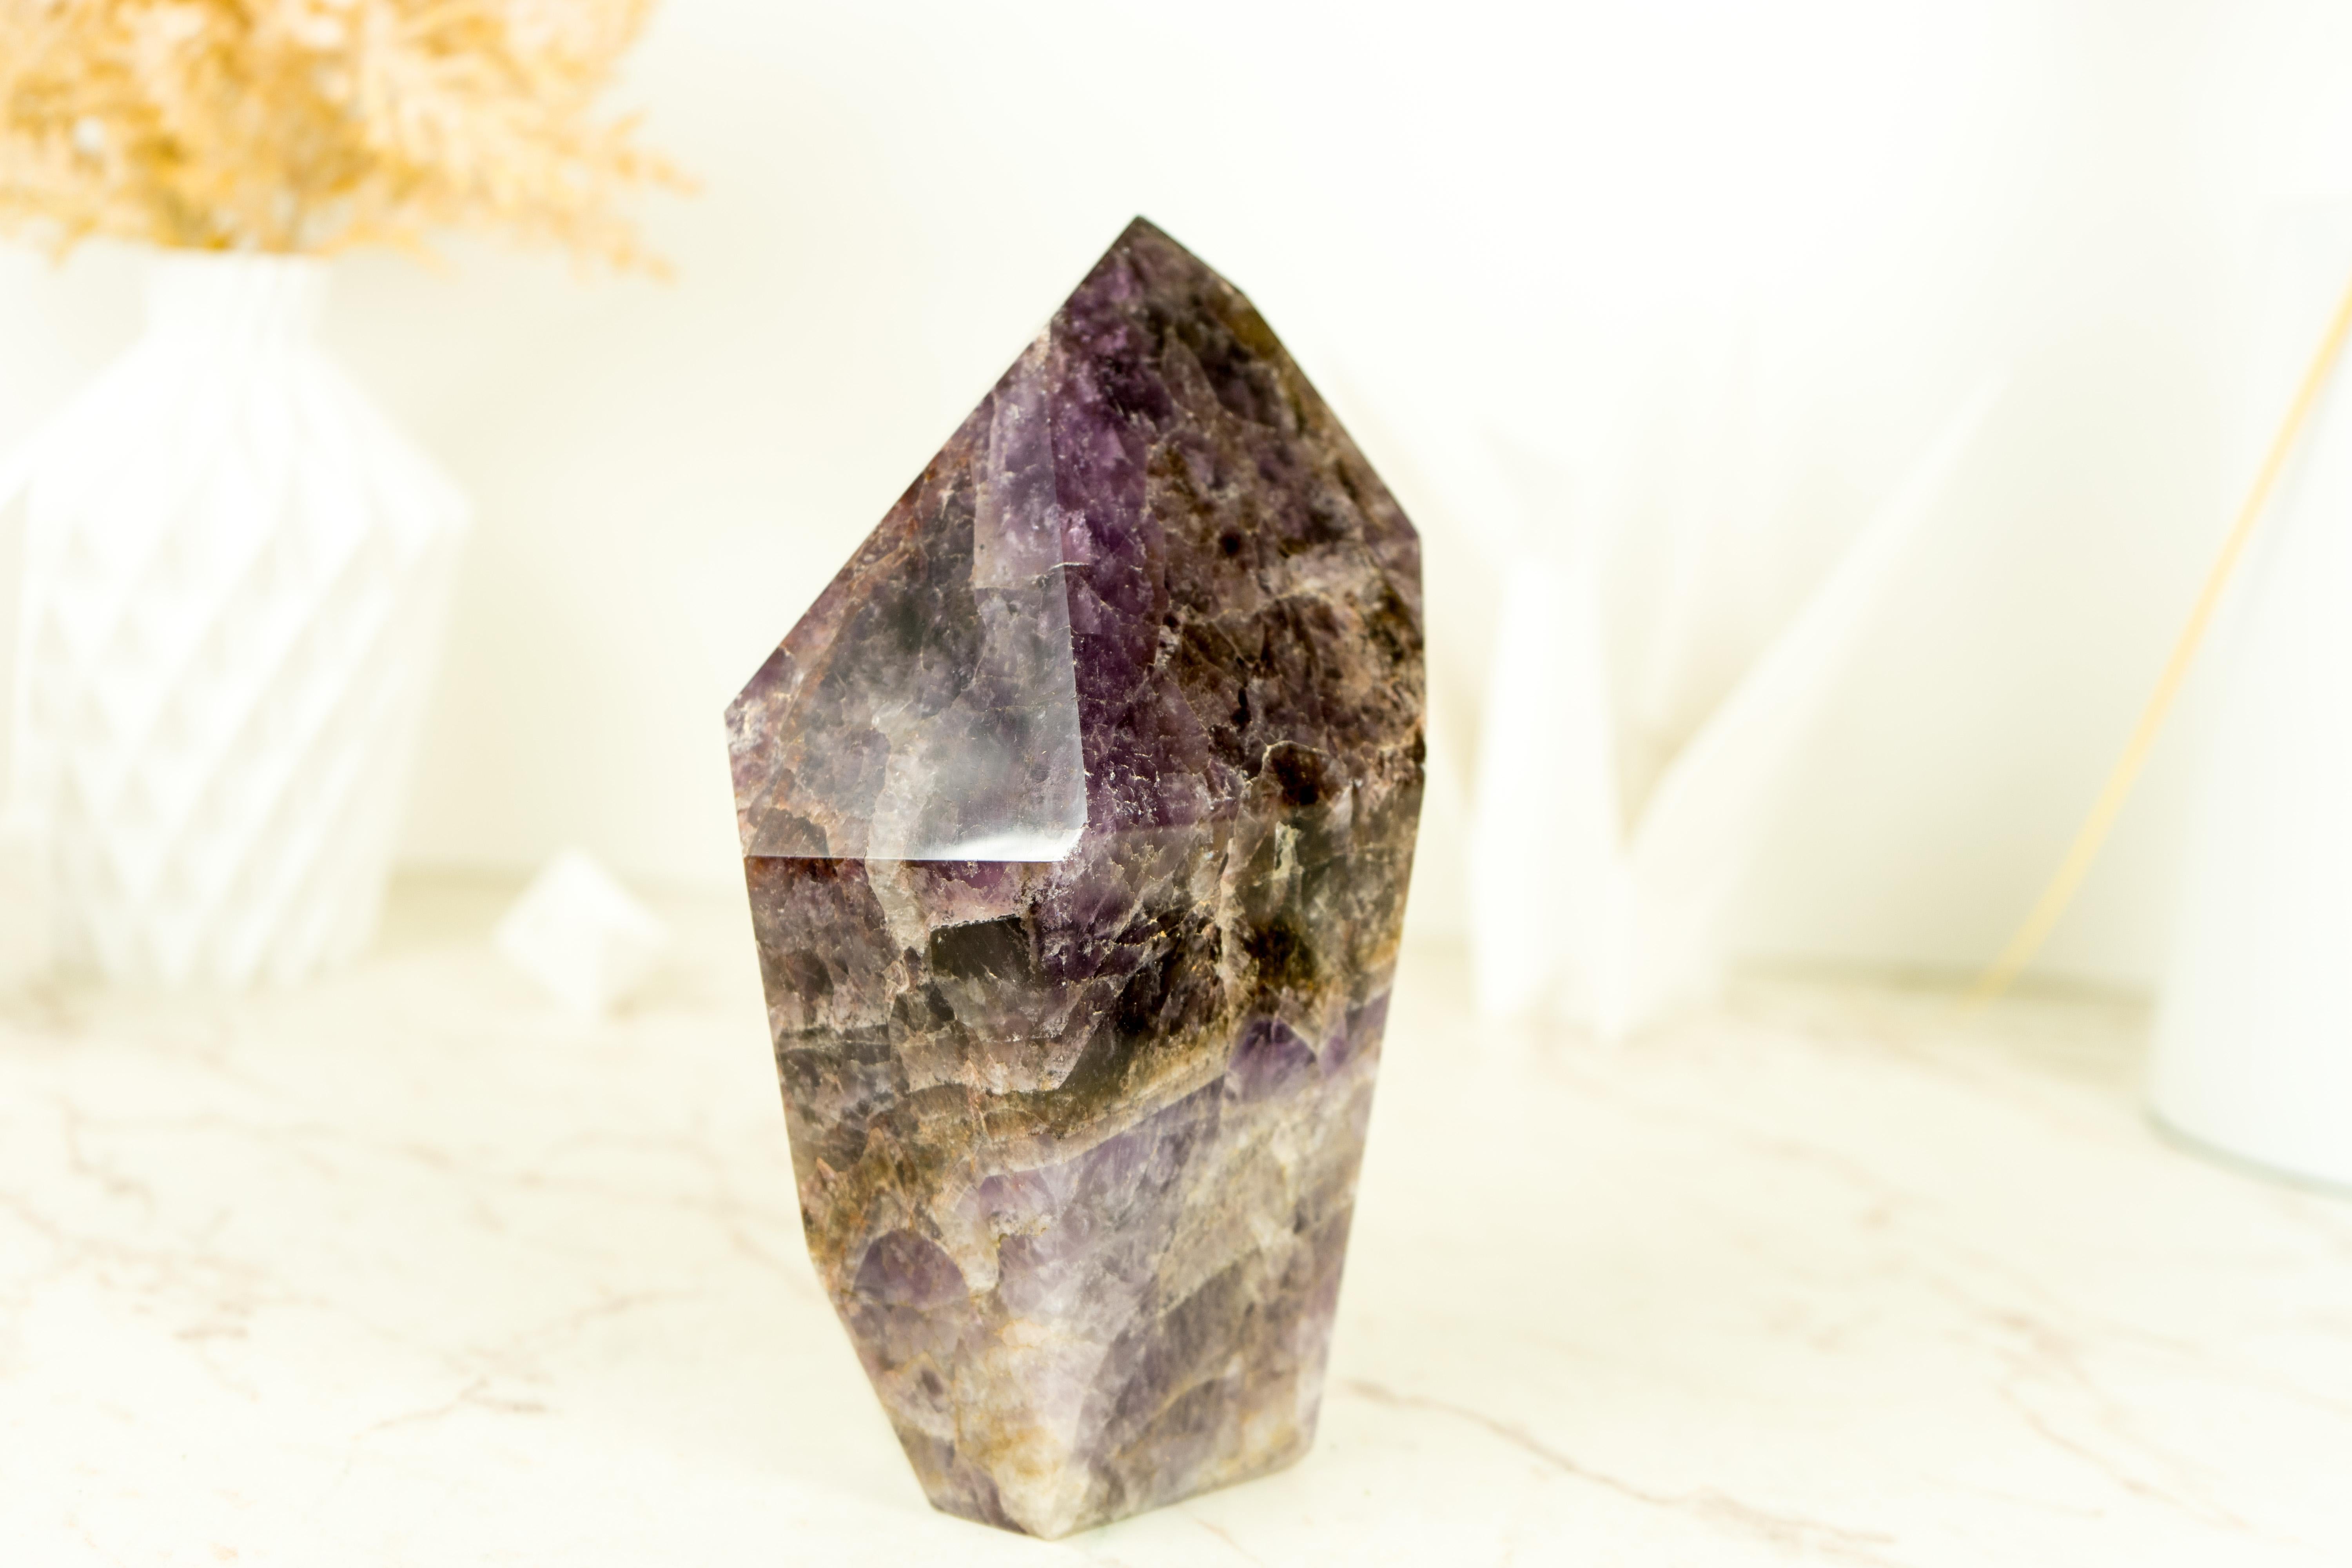 A Large Super Seven Scepter Generator, this self-standing point is a remarkable specimen that showcases both impressive size and unique characteristics. This Super 7 crystal brings beautiful colors on a X-Large point and it's not only a natural